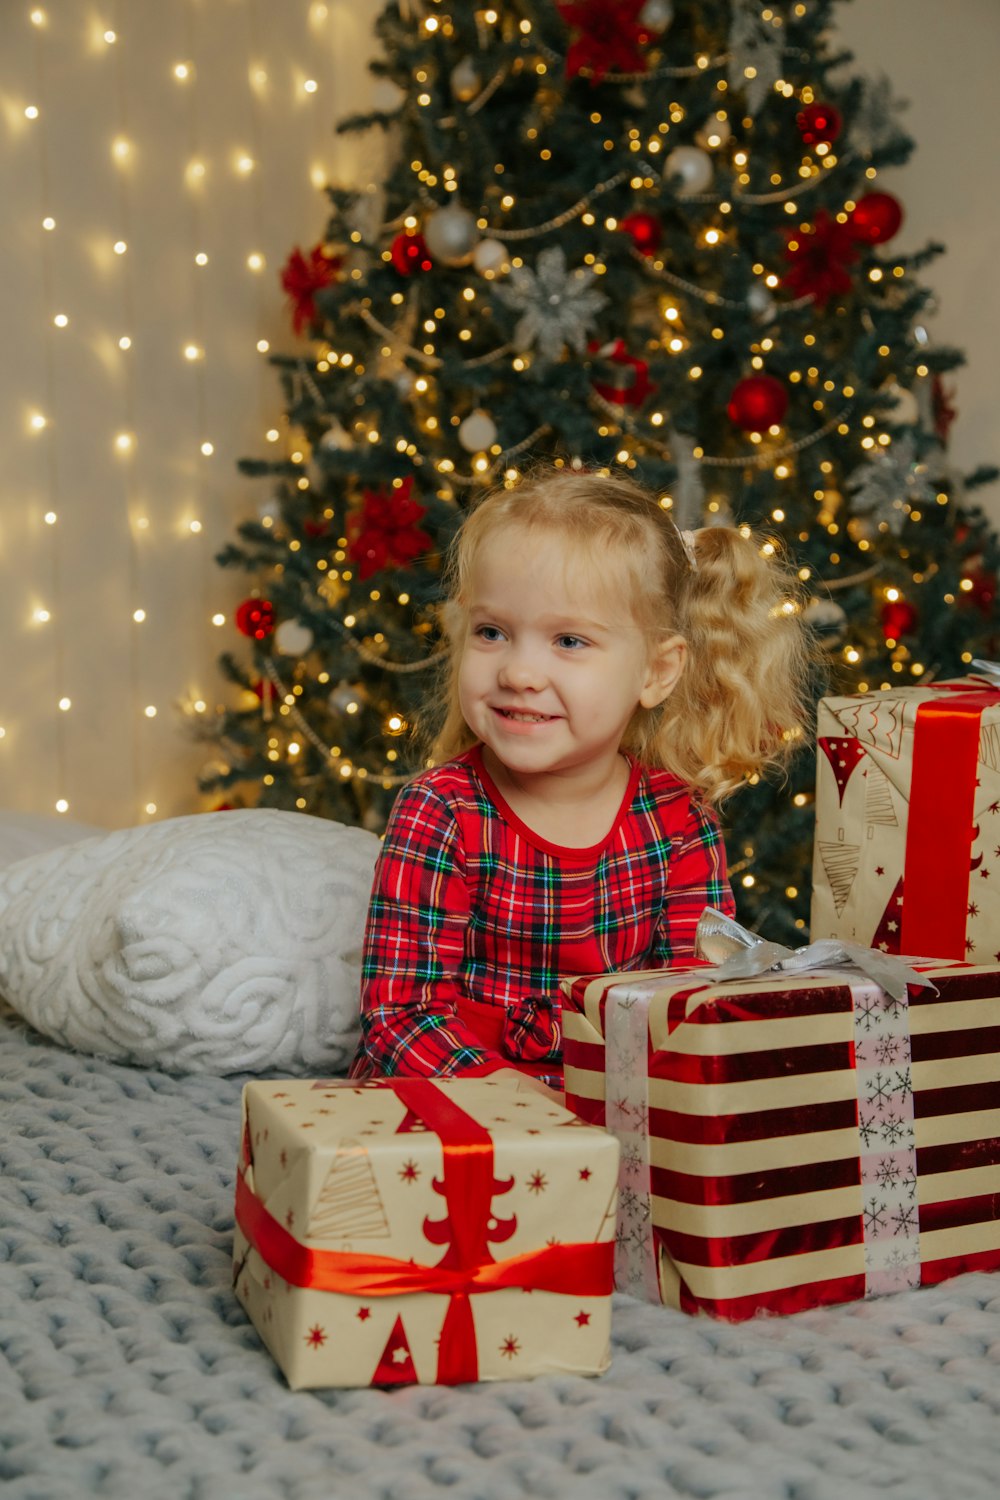 a little girl sitting on a bed next to presents